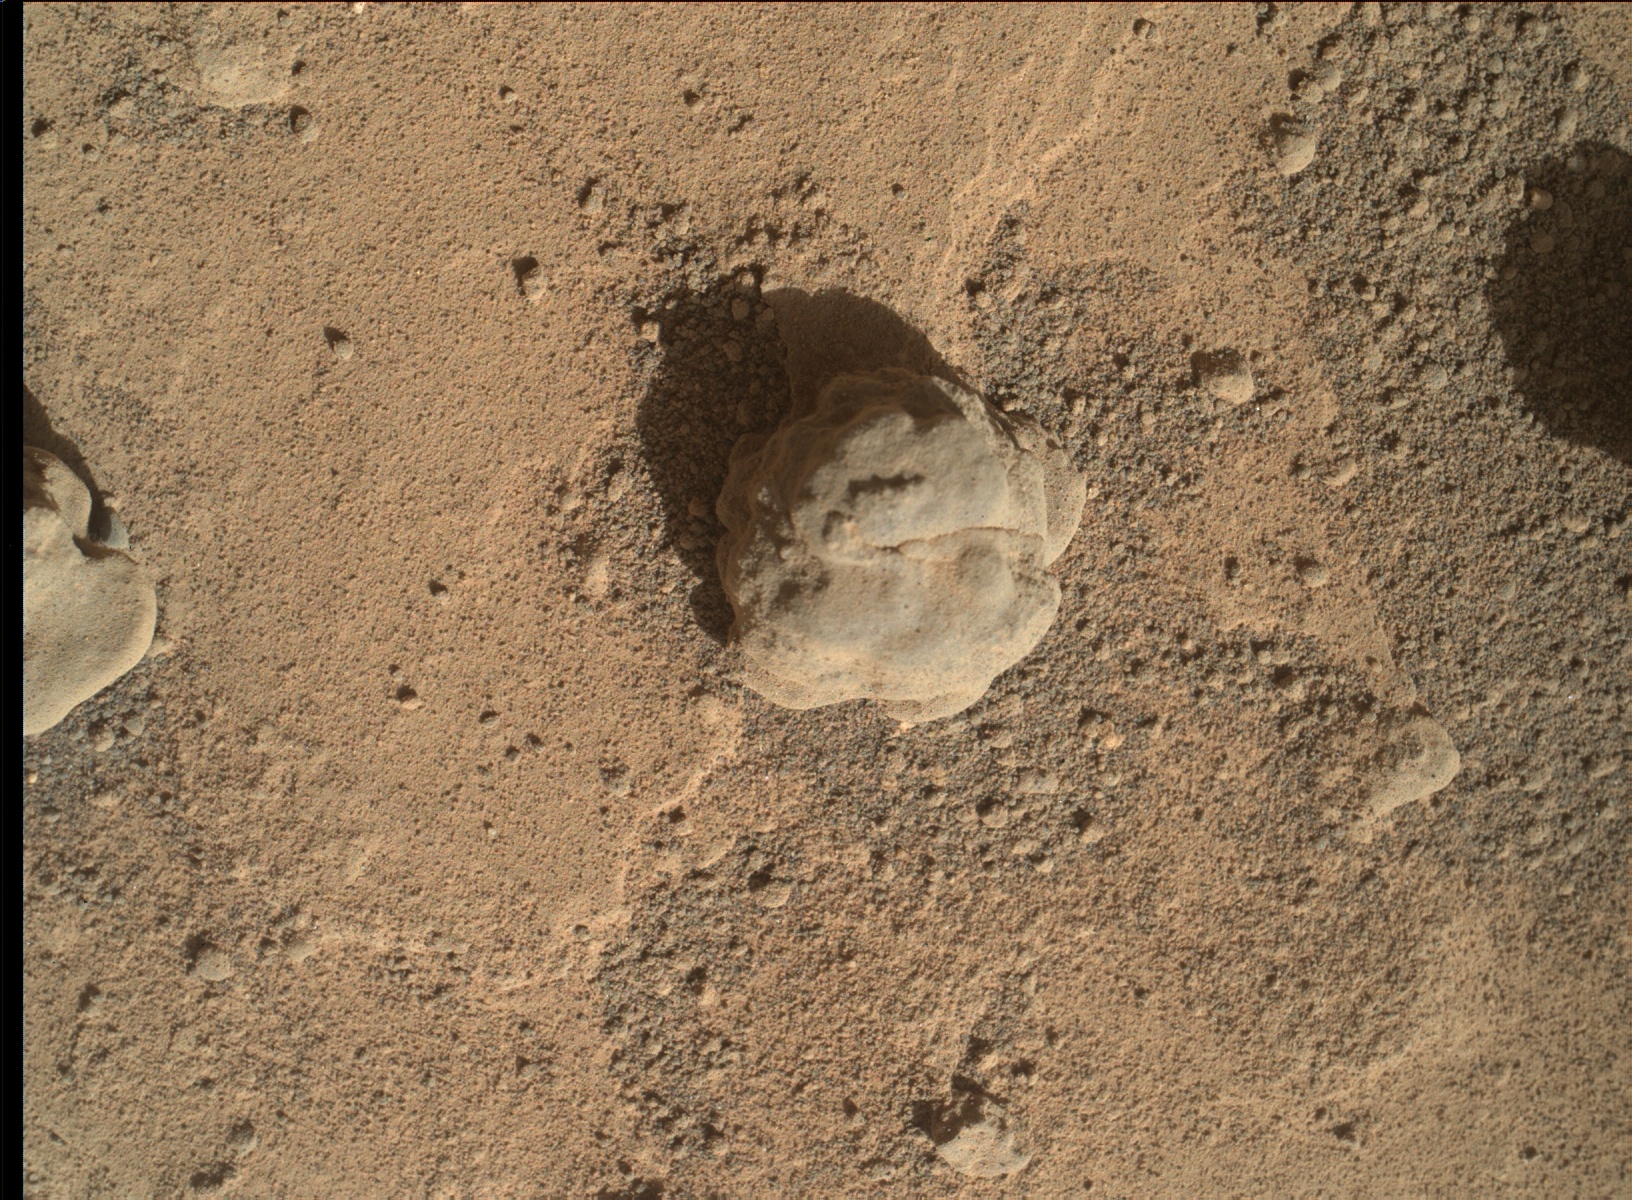 Nasa's Mars rover Curiosity acquired this image using its Mars Hand Lens Imager (MAHLI) on Sol 1278